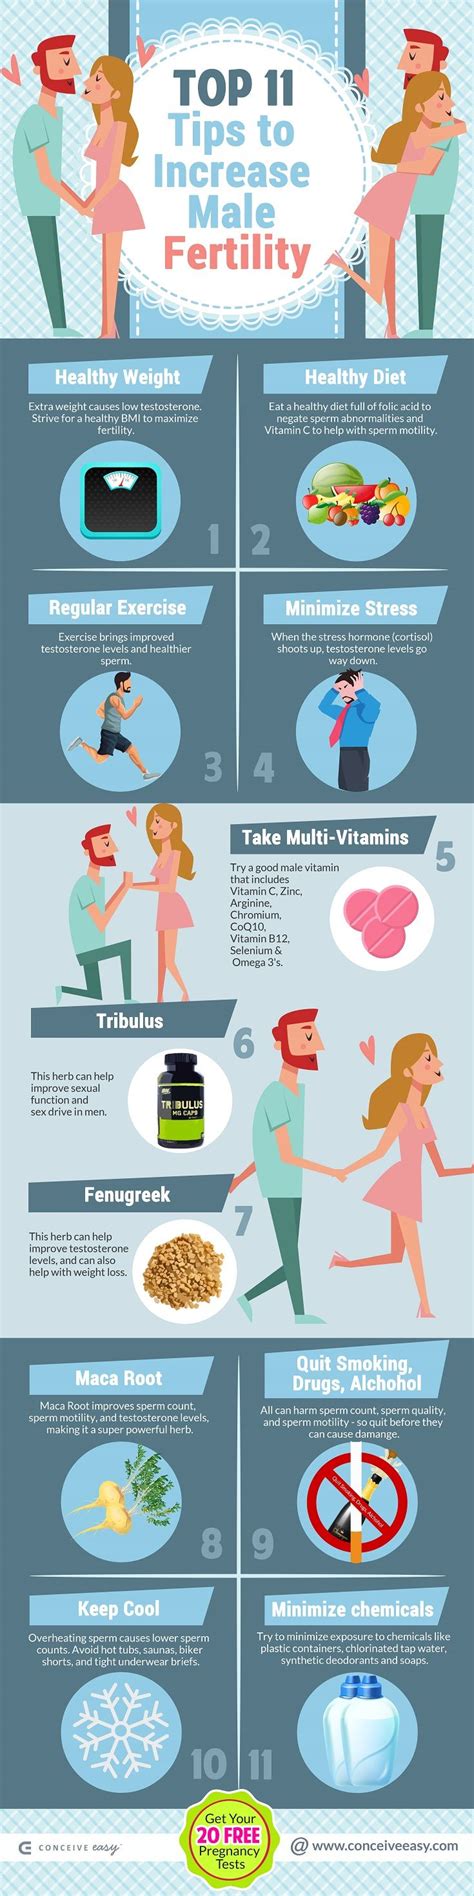 Top 11 Tips To Increase Male Fertility Infographic Natural Fertility Boosters Fertility Health